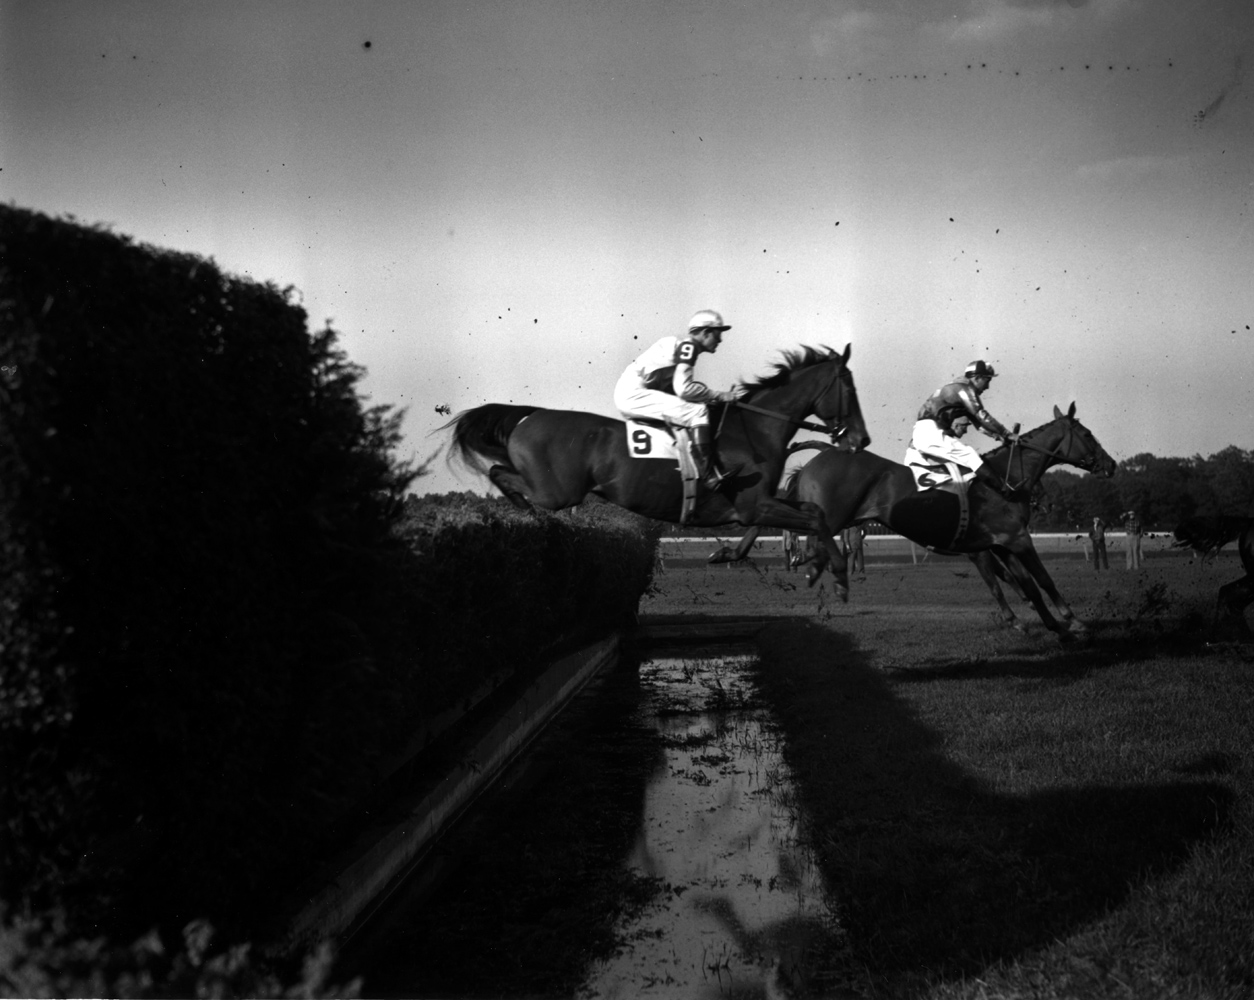 Alfred P. Smithwick and Elkridge taking a jump in the 1951 Grand National at Belmont Park (Keeneland Library Morgan Collection/Museum Collection)